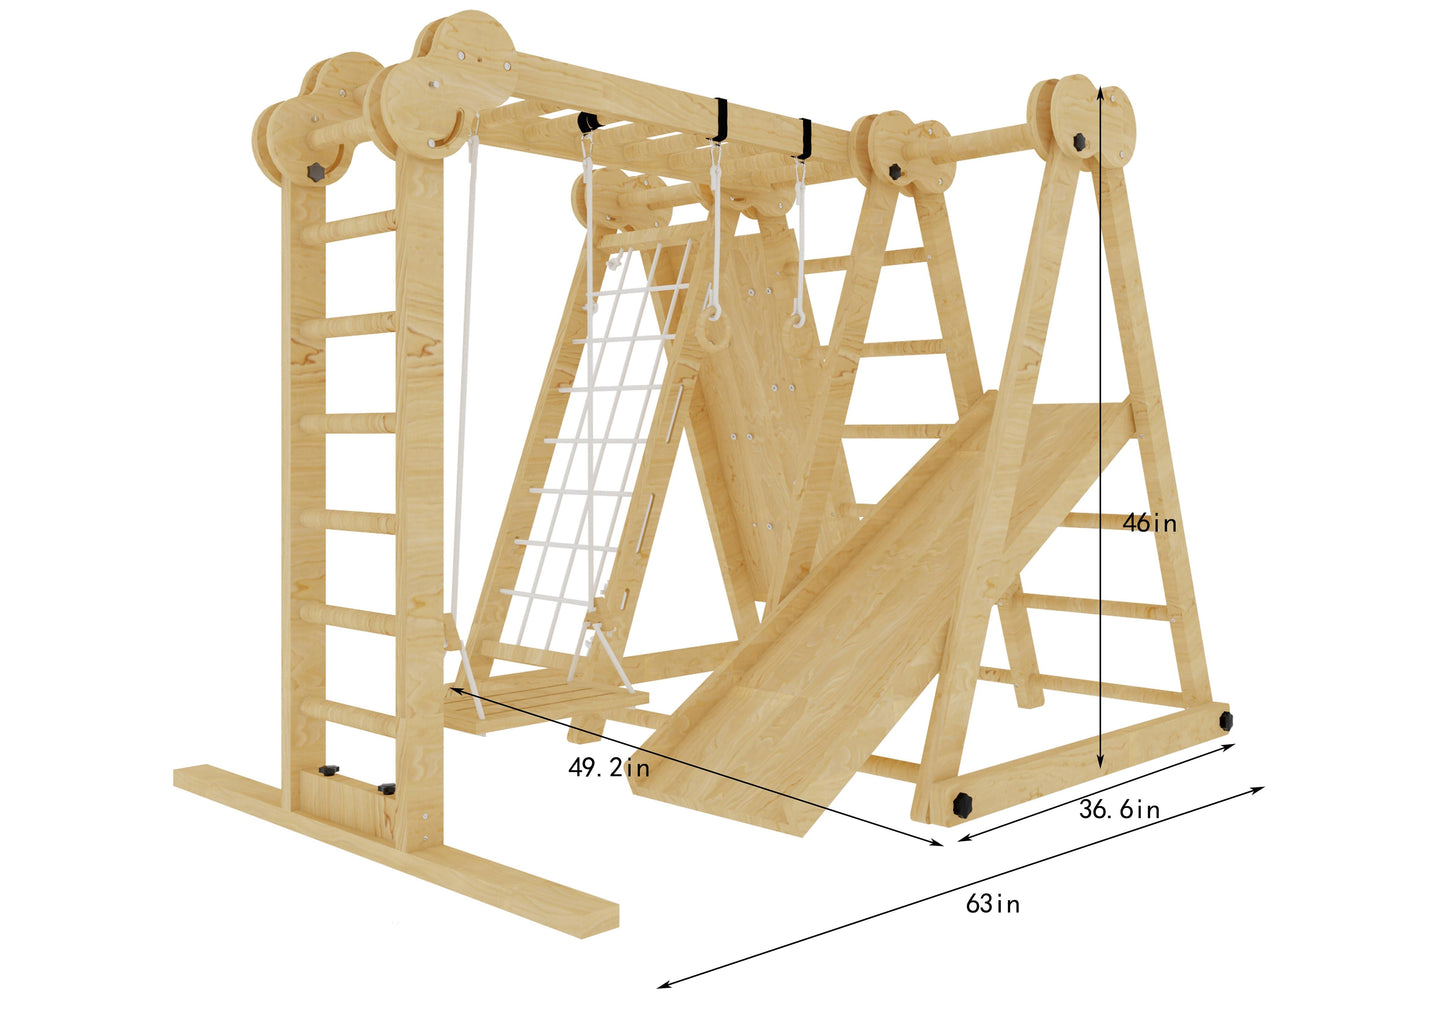 Chestnut - 8-in-1 Jungle Gym for Toddlers by Avenlur